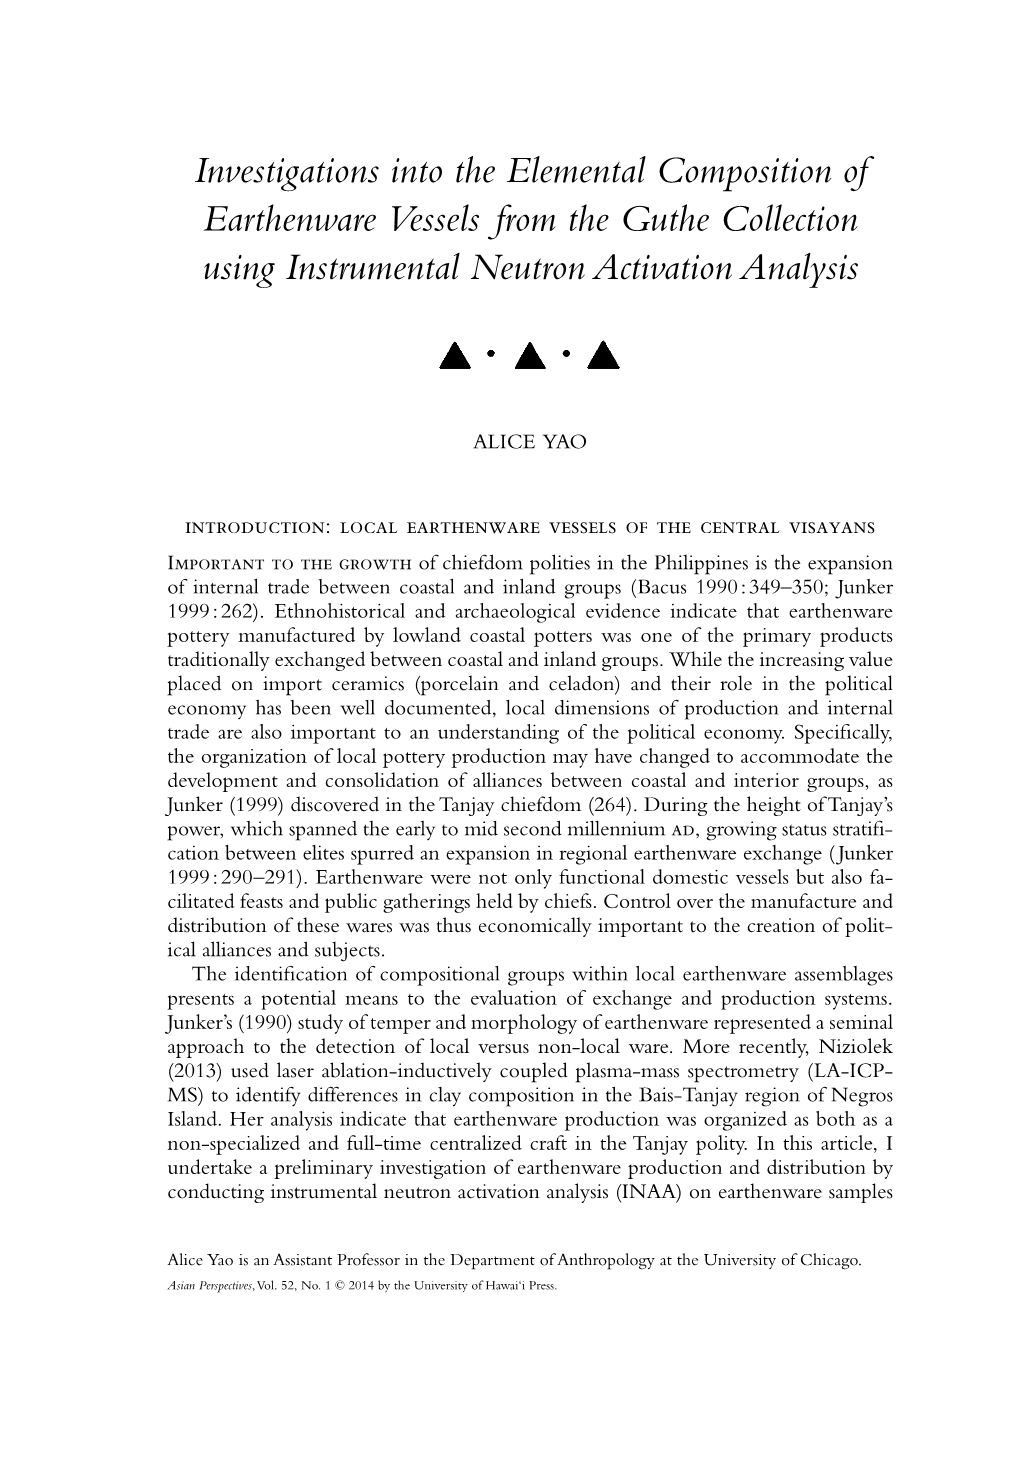 Investigations Into the Elemental Composition of Earthenware Vessels from the Guthe Collection Using Instrumental Neutron Activation Analysis